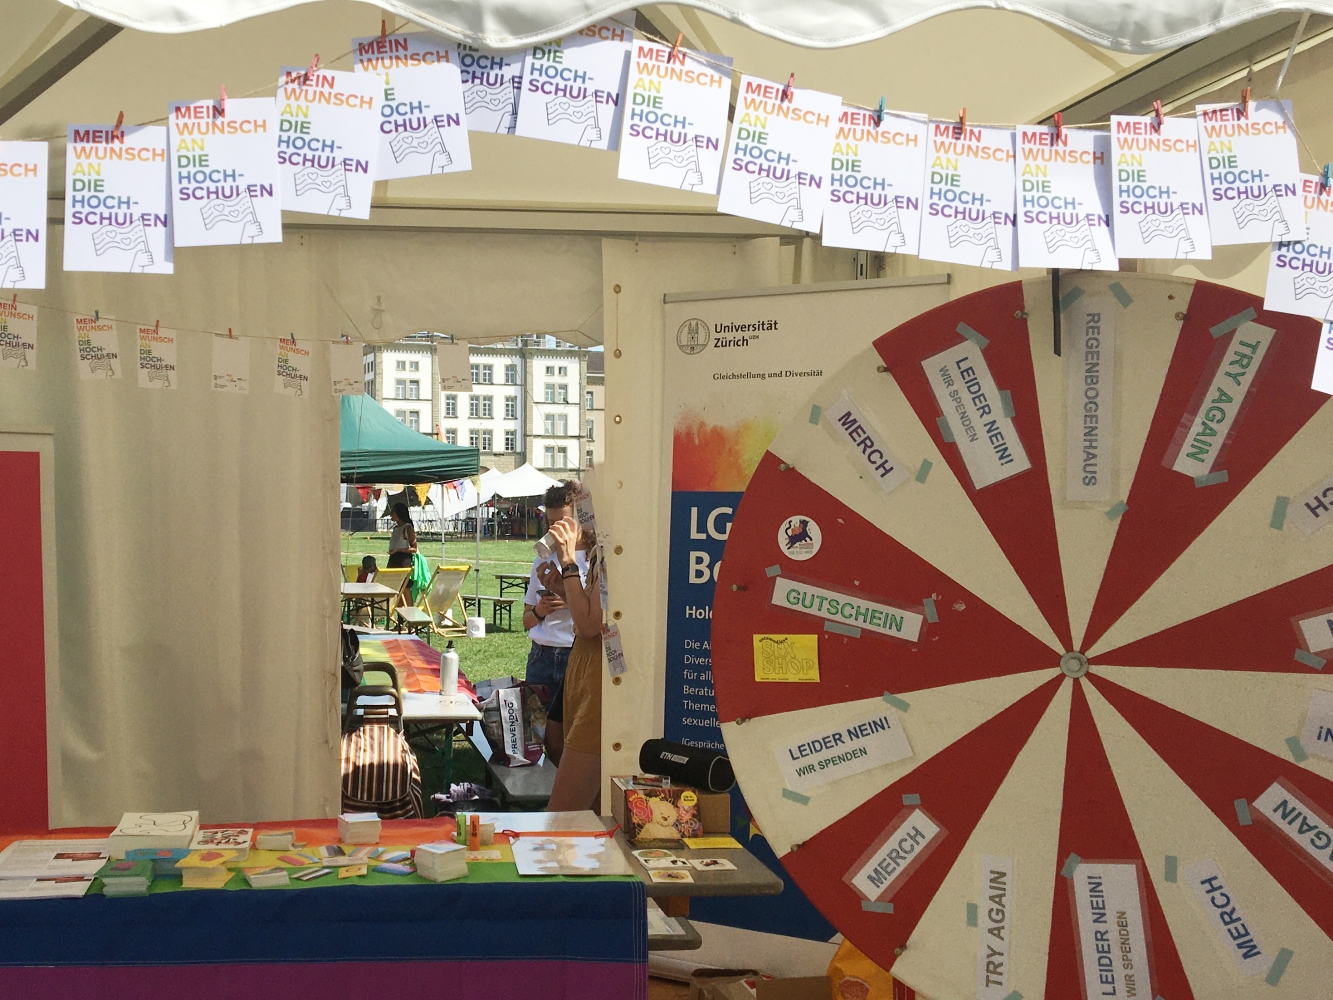 a decorated market stall on the topic of equality and diversity at universities, many materials are laid out on the table of the stall, roll ups are in the stall, in front of the stall there is a red and white striped wheel of fortune